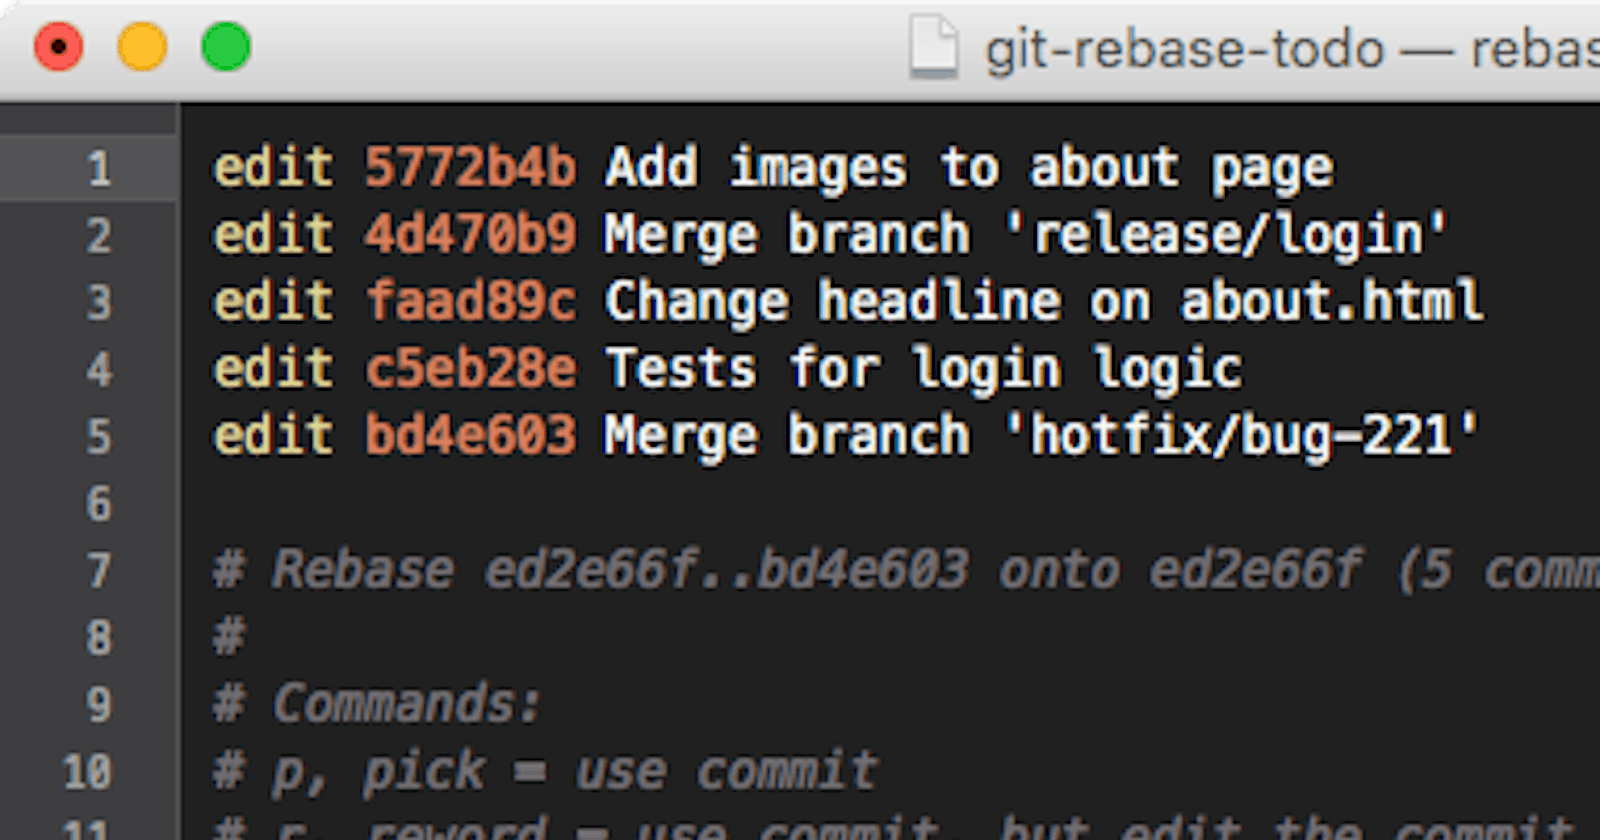 How to fix the wrong name and email being an author in a branch's commits